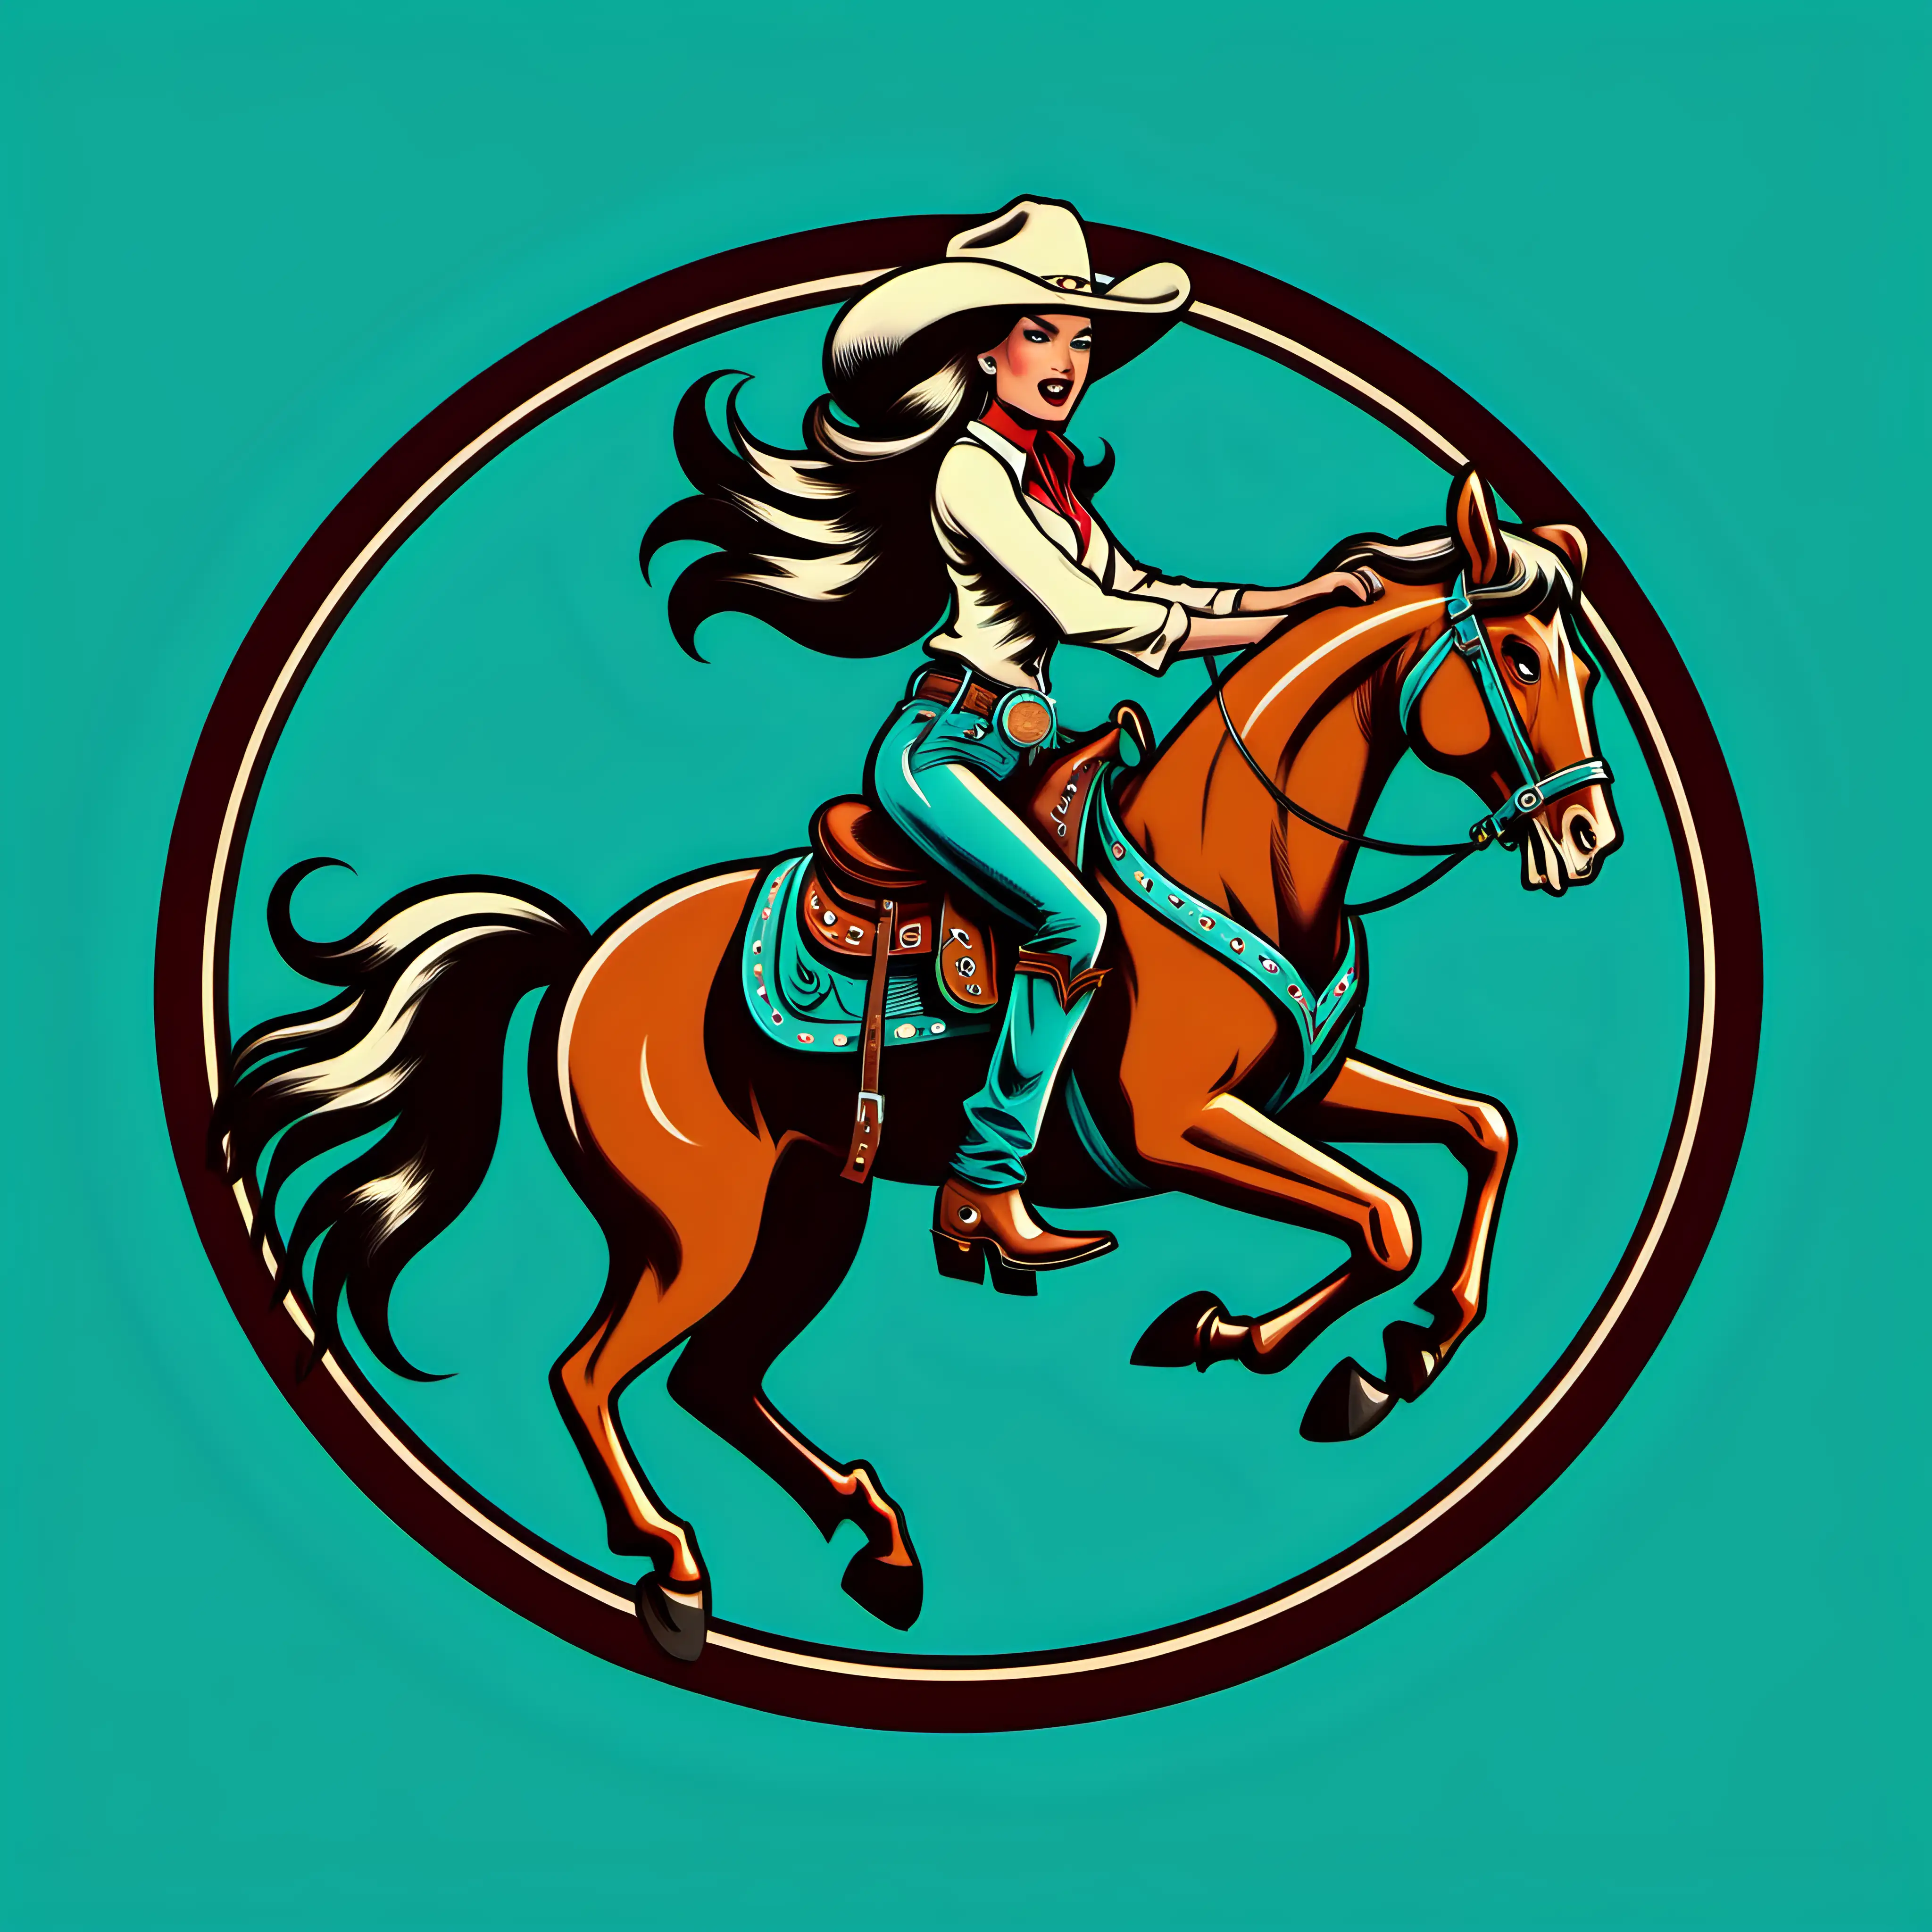 simple cartoon cowgirl with long hair on a bucking bronco in a western circle logo retro with turquoise background
